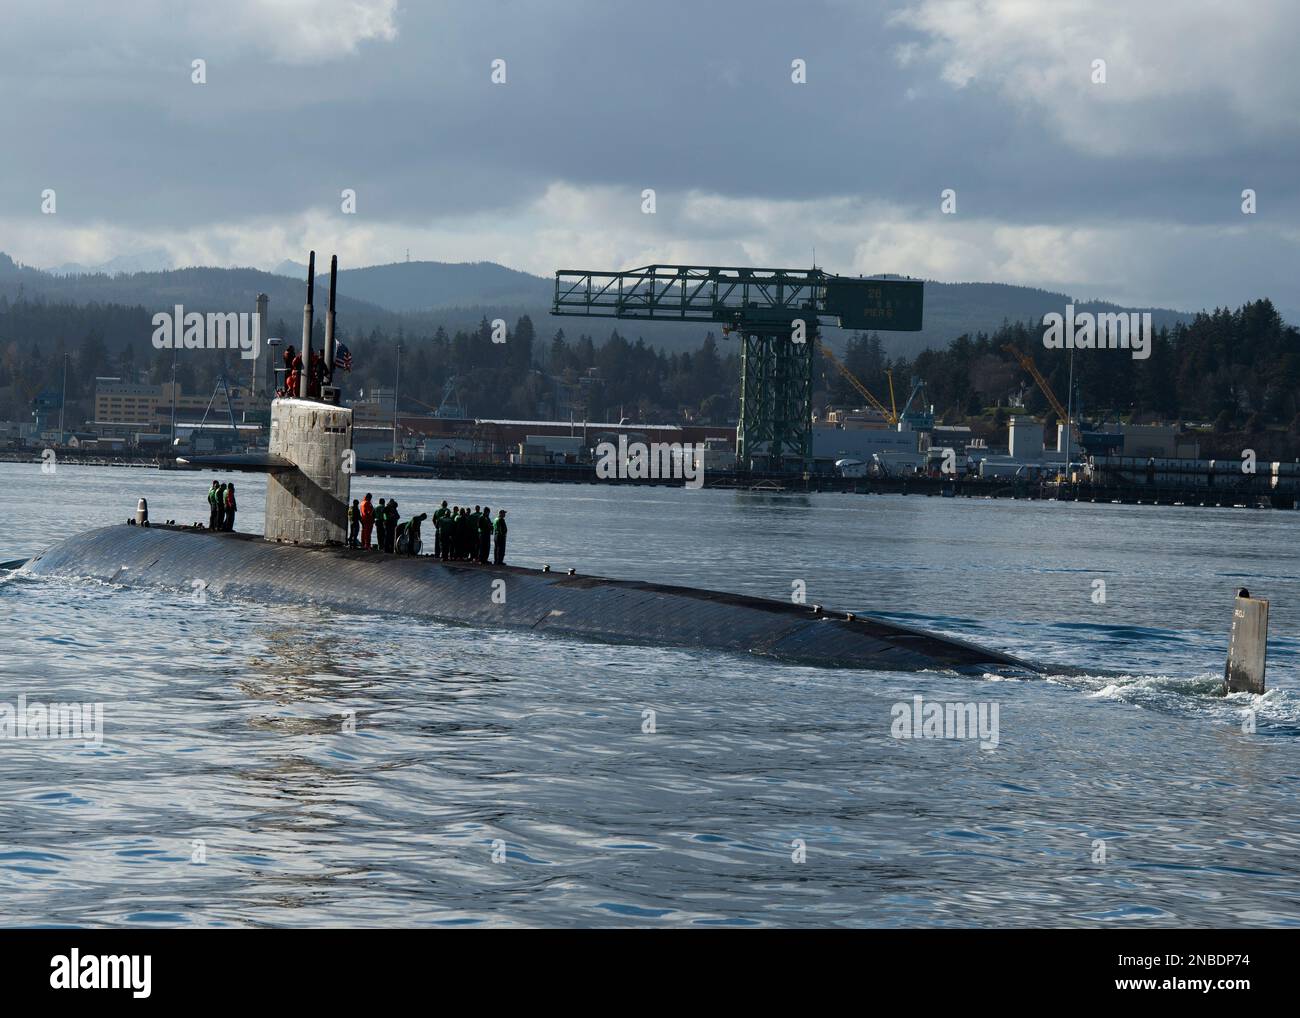 230210-N-ED185-1341  PUGET SOUND, Wash. (Feb. 10, 2023) The Los Angeles-class fast-attack submarine USS Key West (SSN 722) transits the Puget Sound before mooring at Naval Base Kitsap – Bremerton, Washington, February 10, 2023. Measuring more than 360 feet long and weighing more than 6,900 tons when submerged, Key West supports a multitude of missions to include anti-submarine warfare, anti-surface ship warfare, surveillance and reconnaissance, and strike warfare. (U.S. Navy Photo by Mass Communication Specialist 1st Class Brian. G. Reynolds) Stock Photo